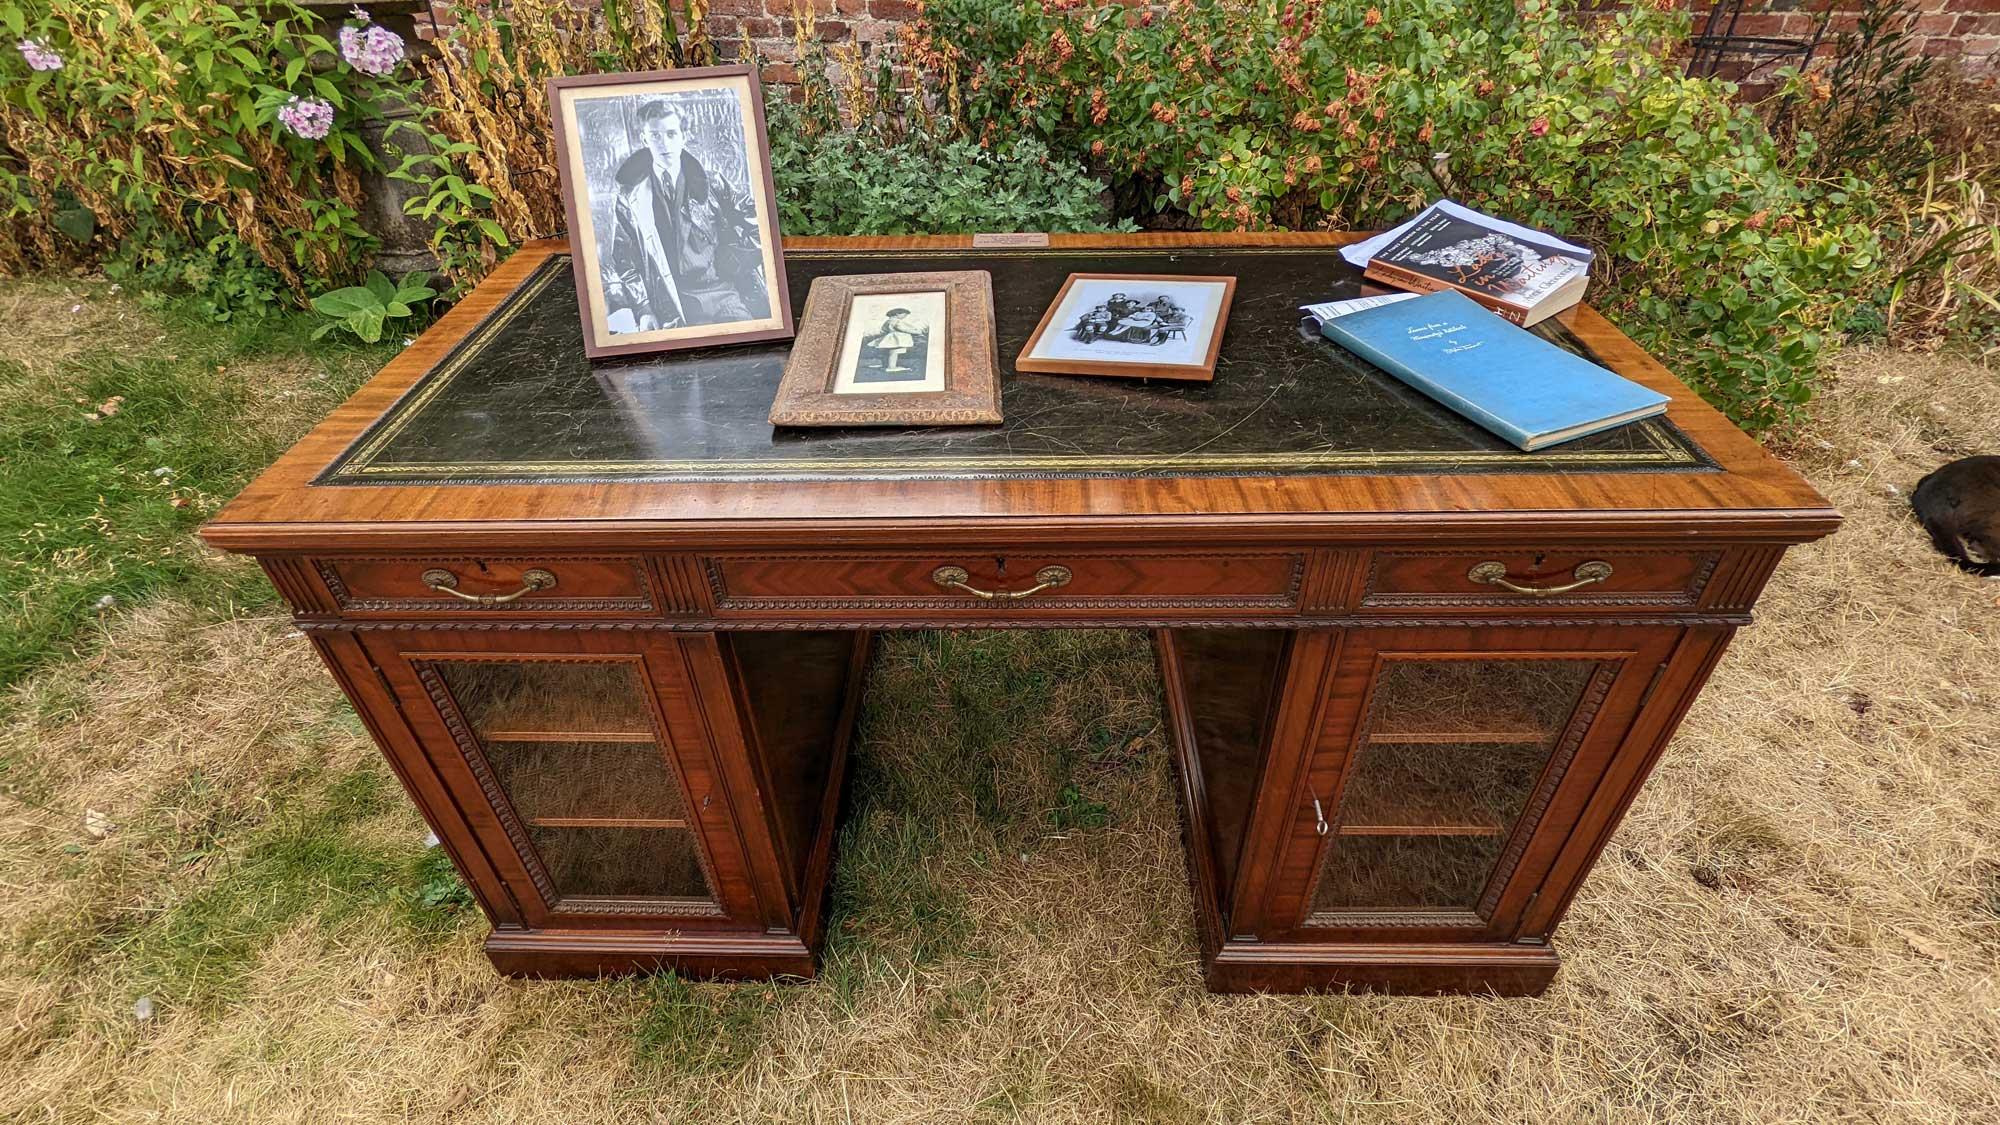 This superb and unusual pedestal writing desk was formerly owned and used by Stephen Tenant. It came from his home where he lived until his death in 1987 - being Wilsford Manor in Wiltshire. 

The desk has full provenance having been purchased by